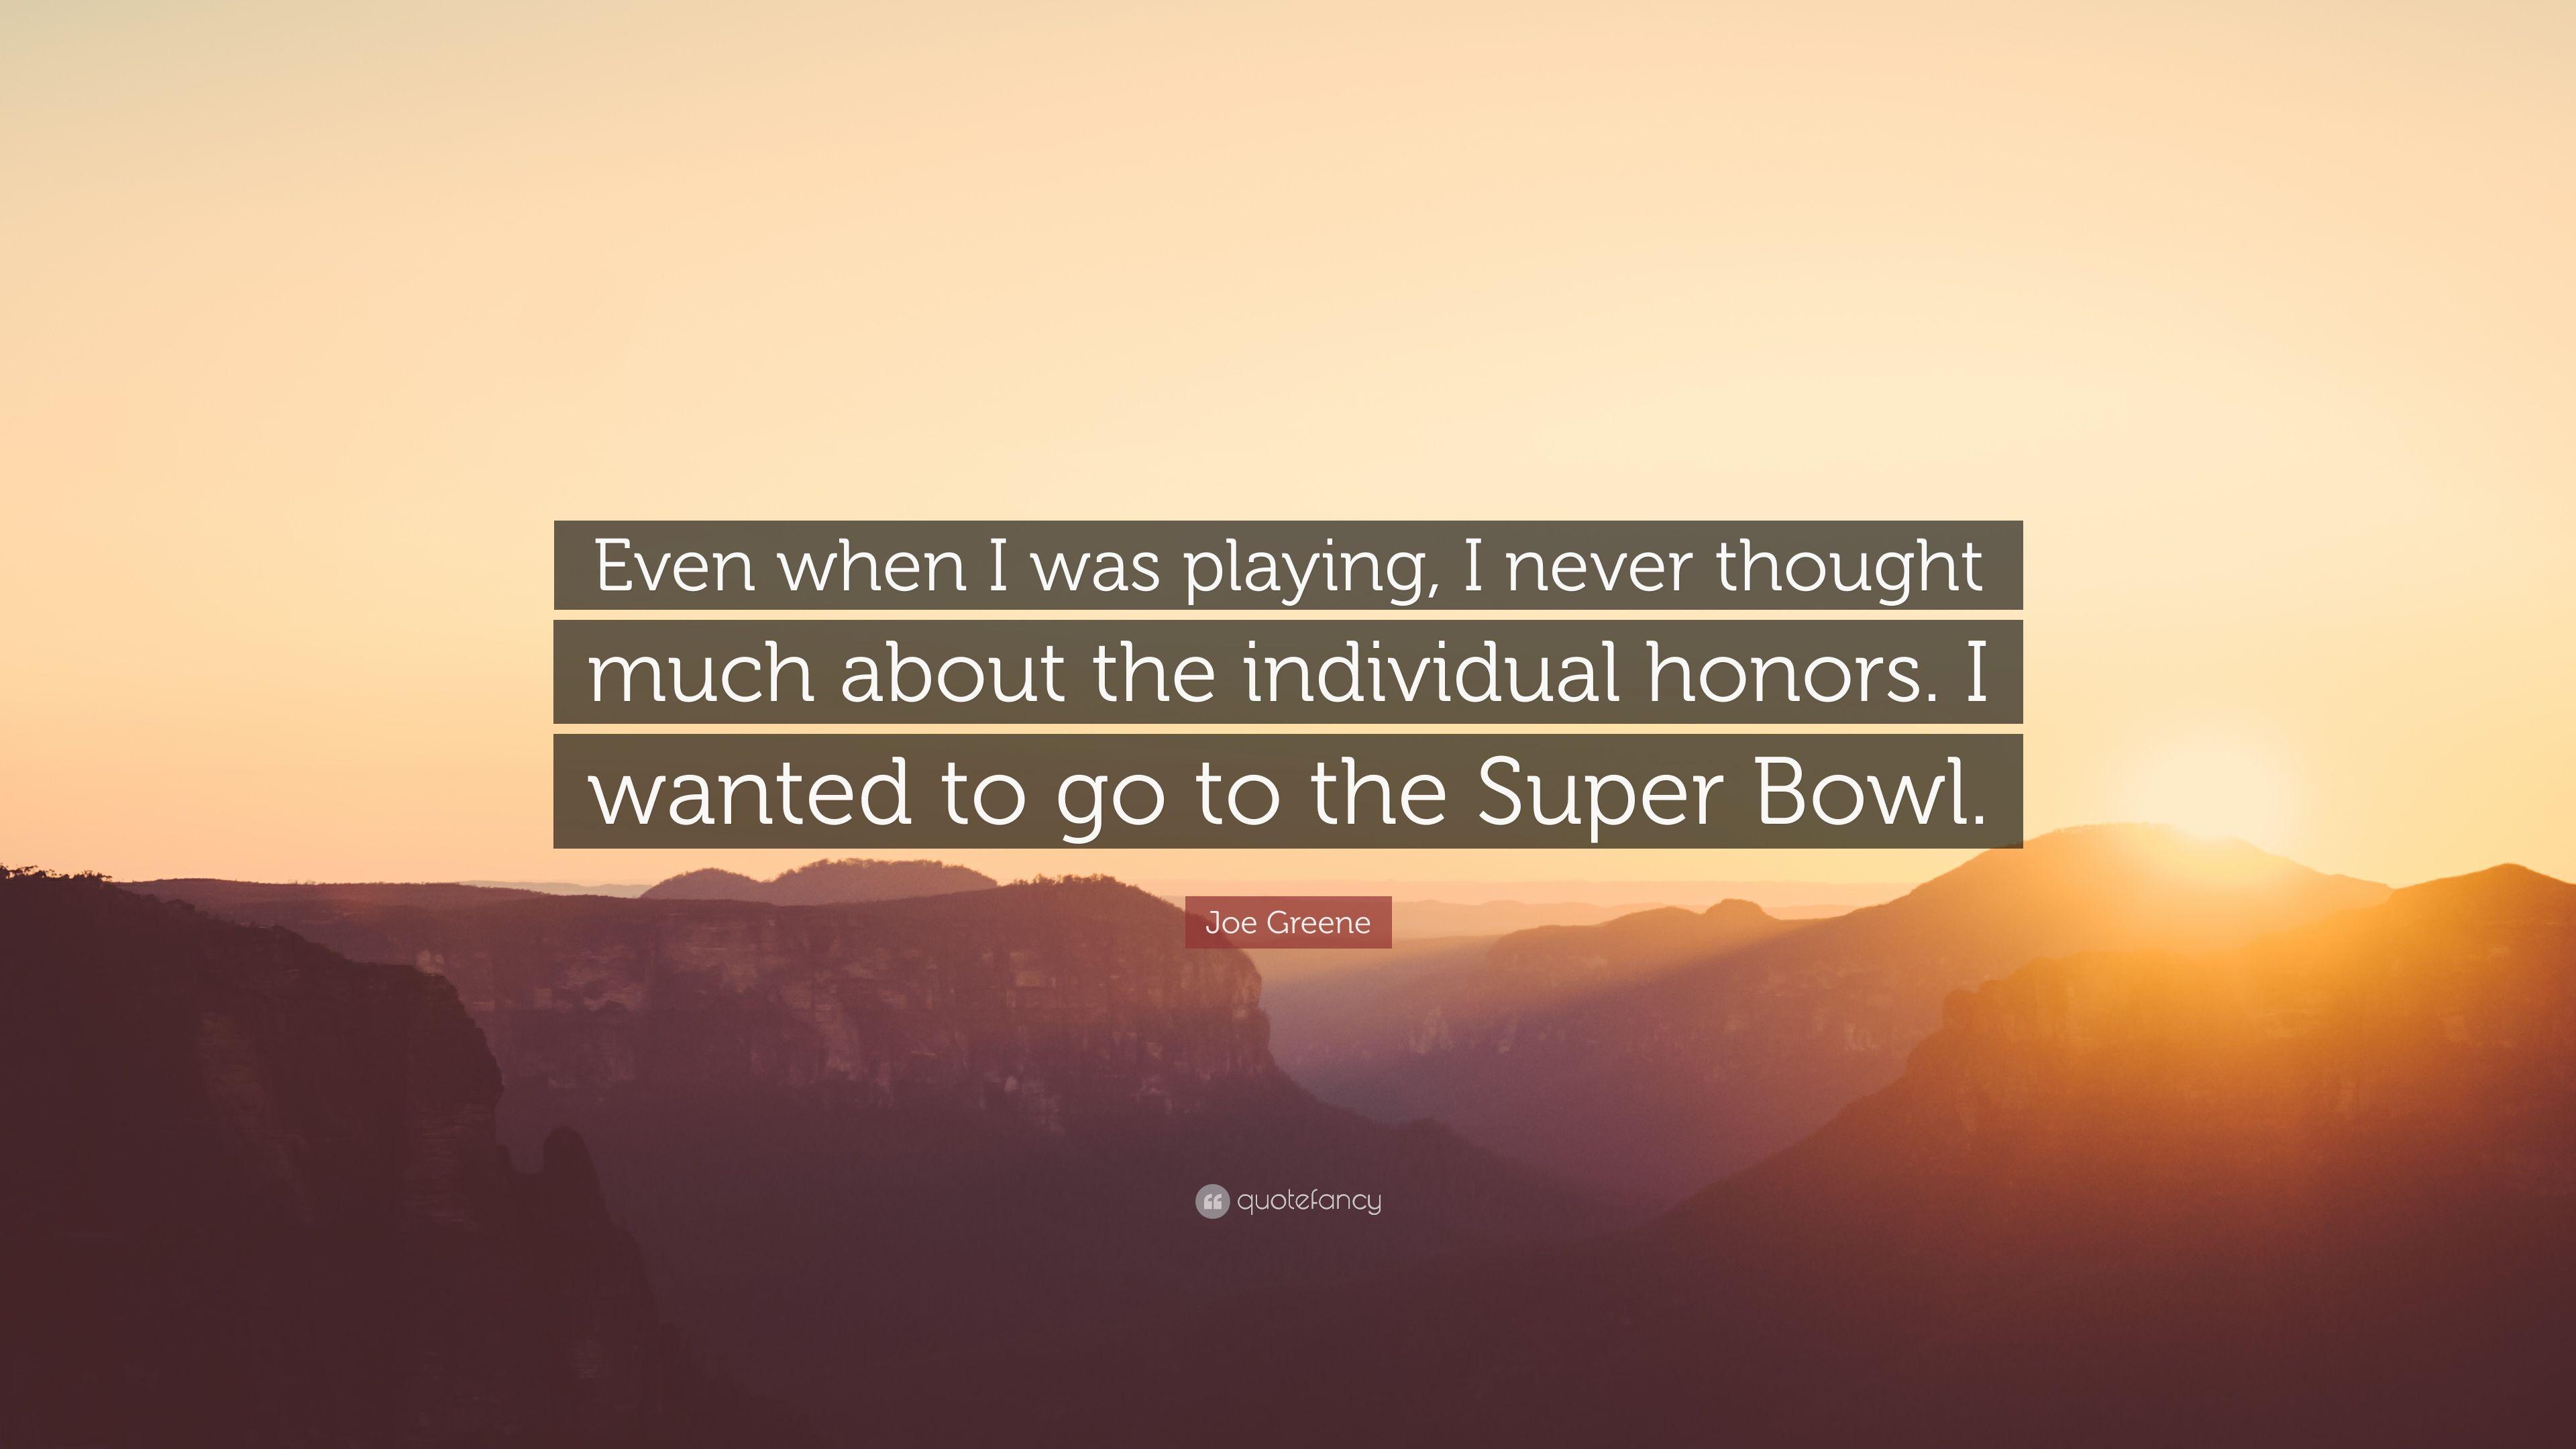 Joe Greene Quote: “Even when I was playing, I never thought much